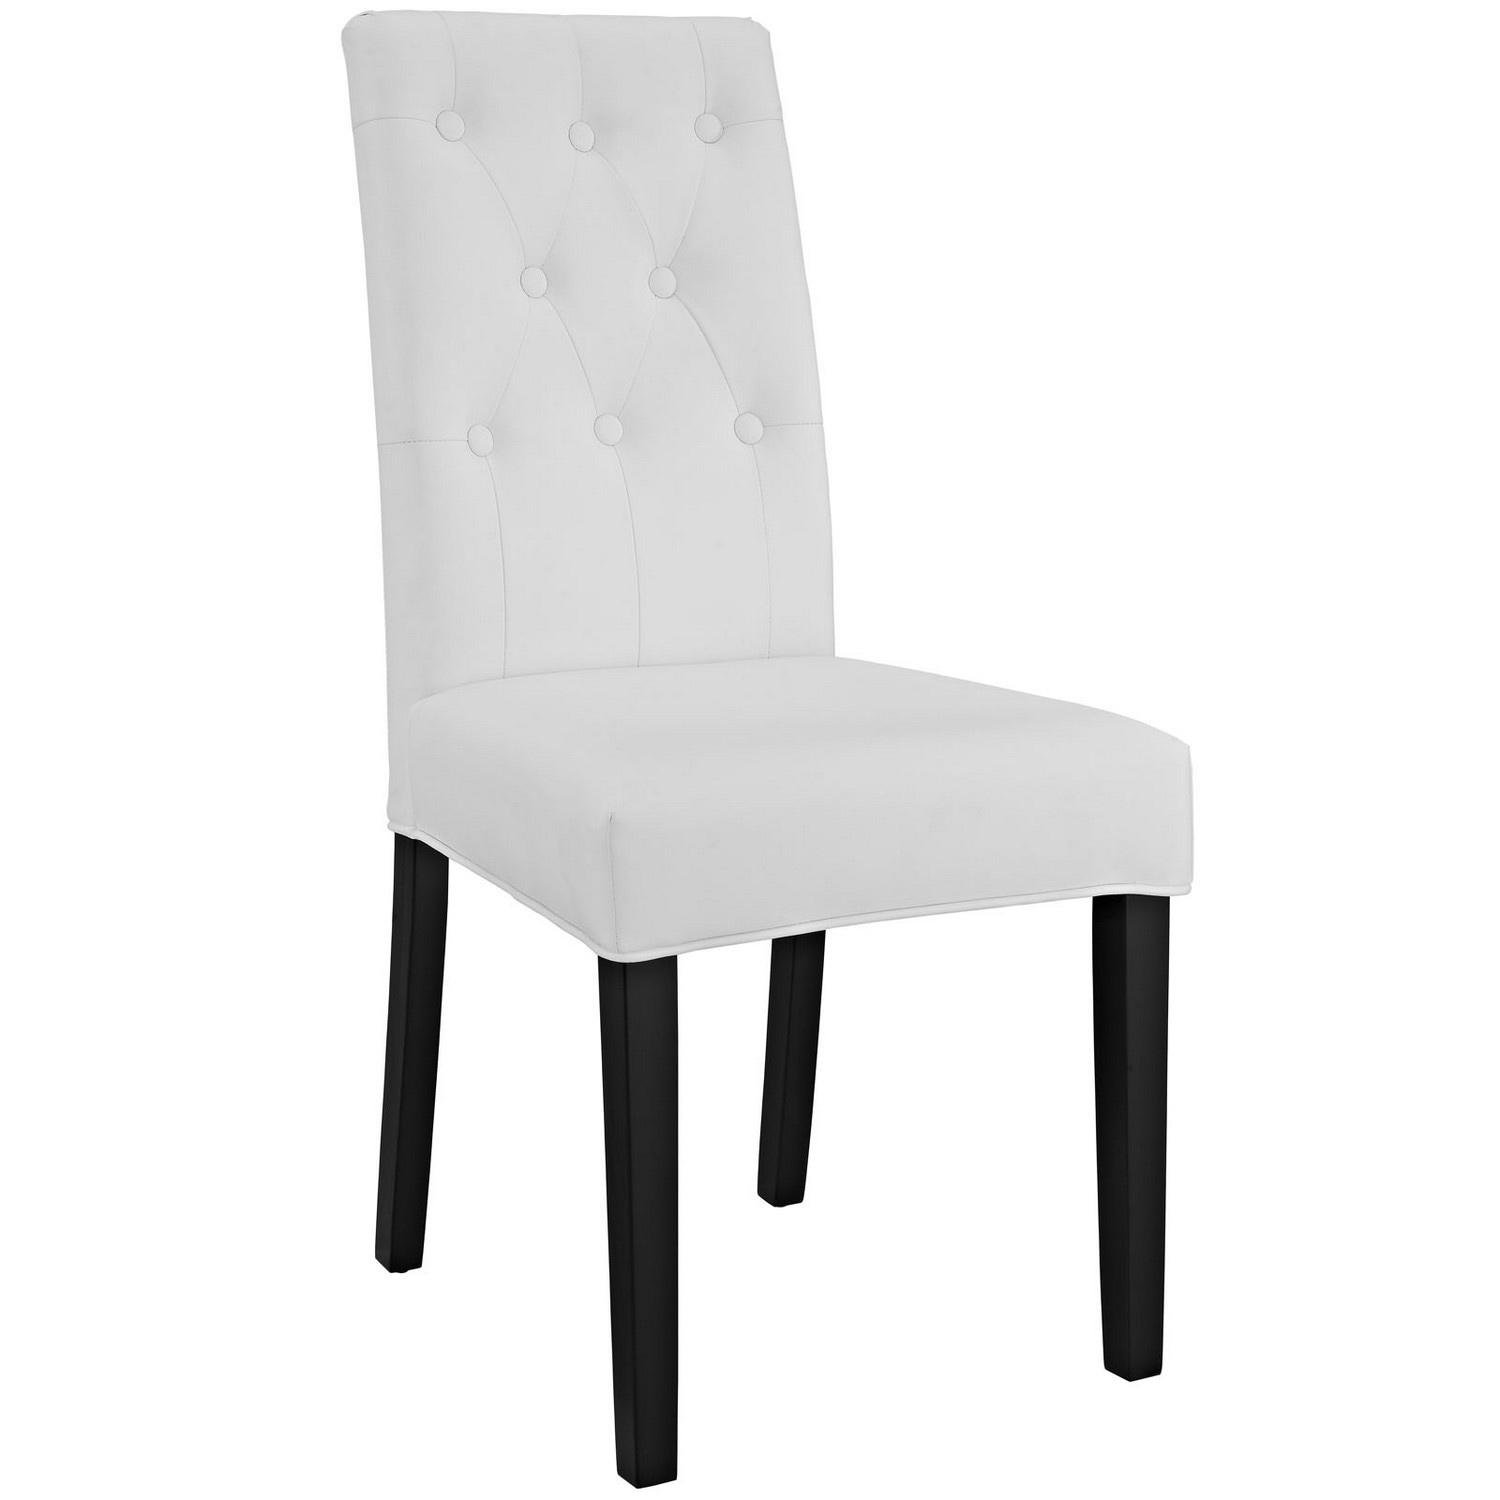 Modway Confer Dining Vinyl Side Chair - White